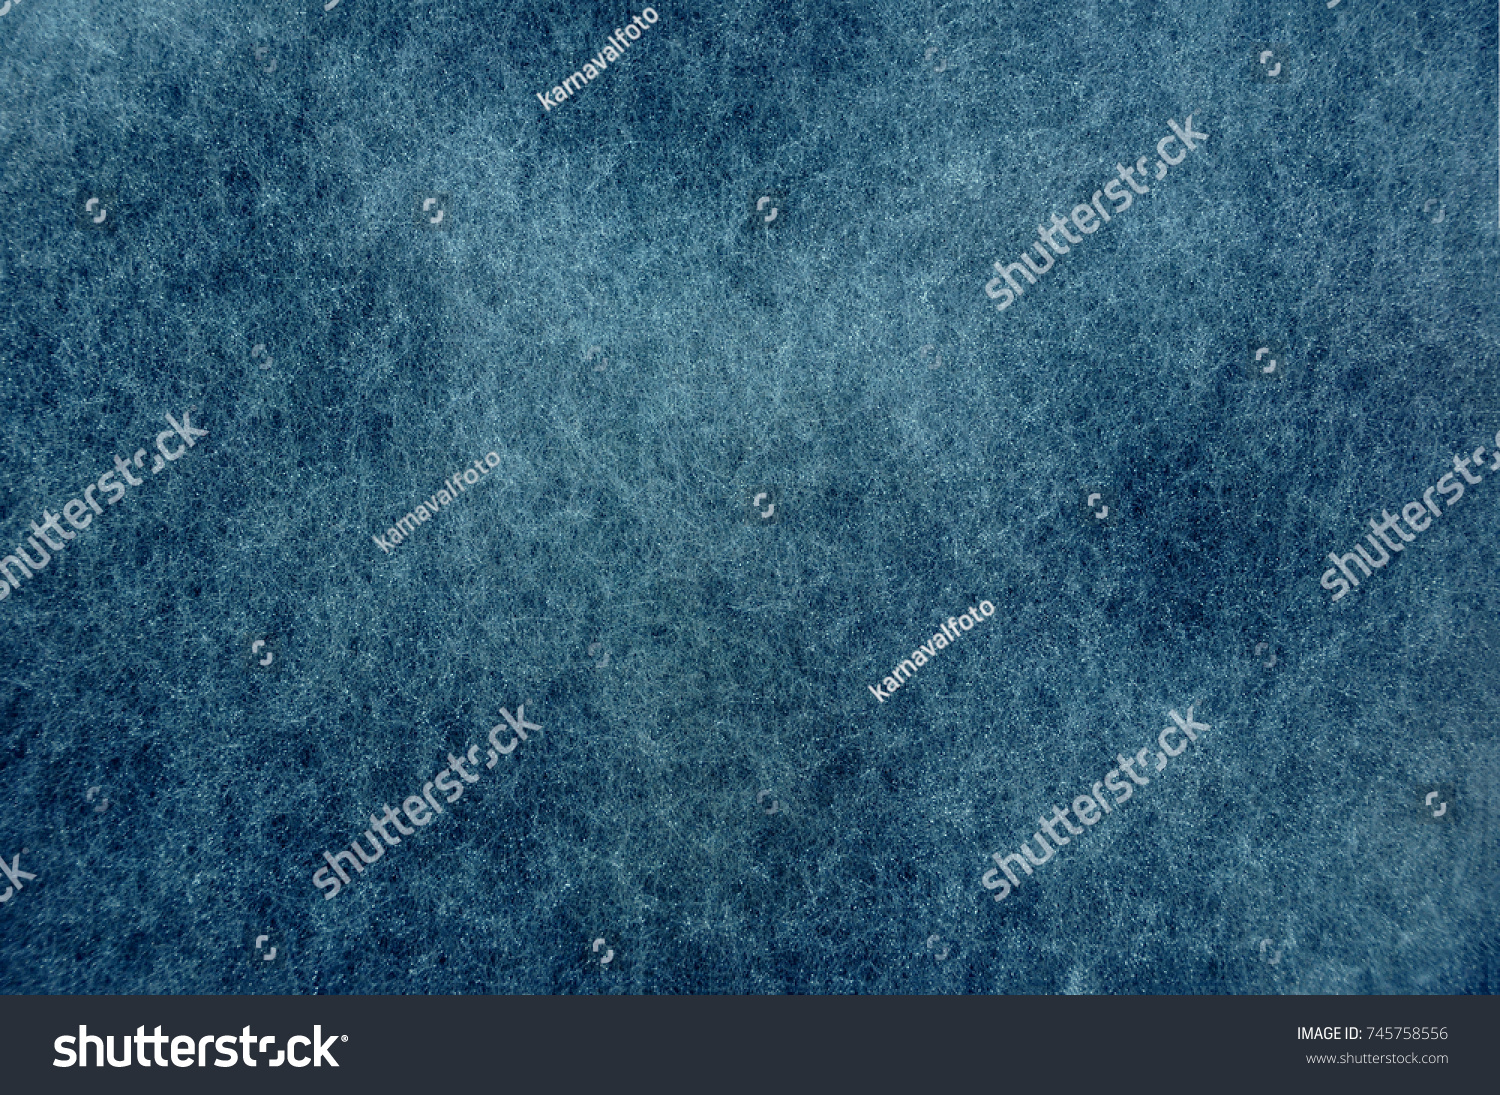 Mold background painted in blue with soft focus. Old dramatic dark texture and blue abstract grunge background.  #745758556